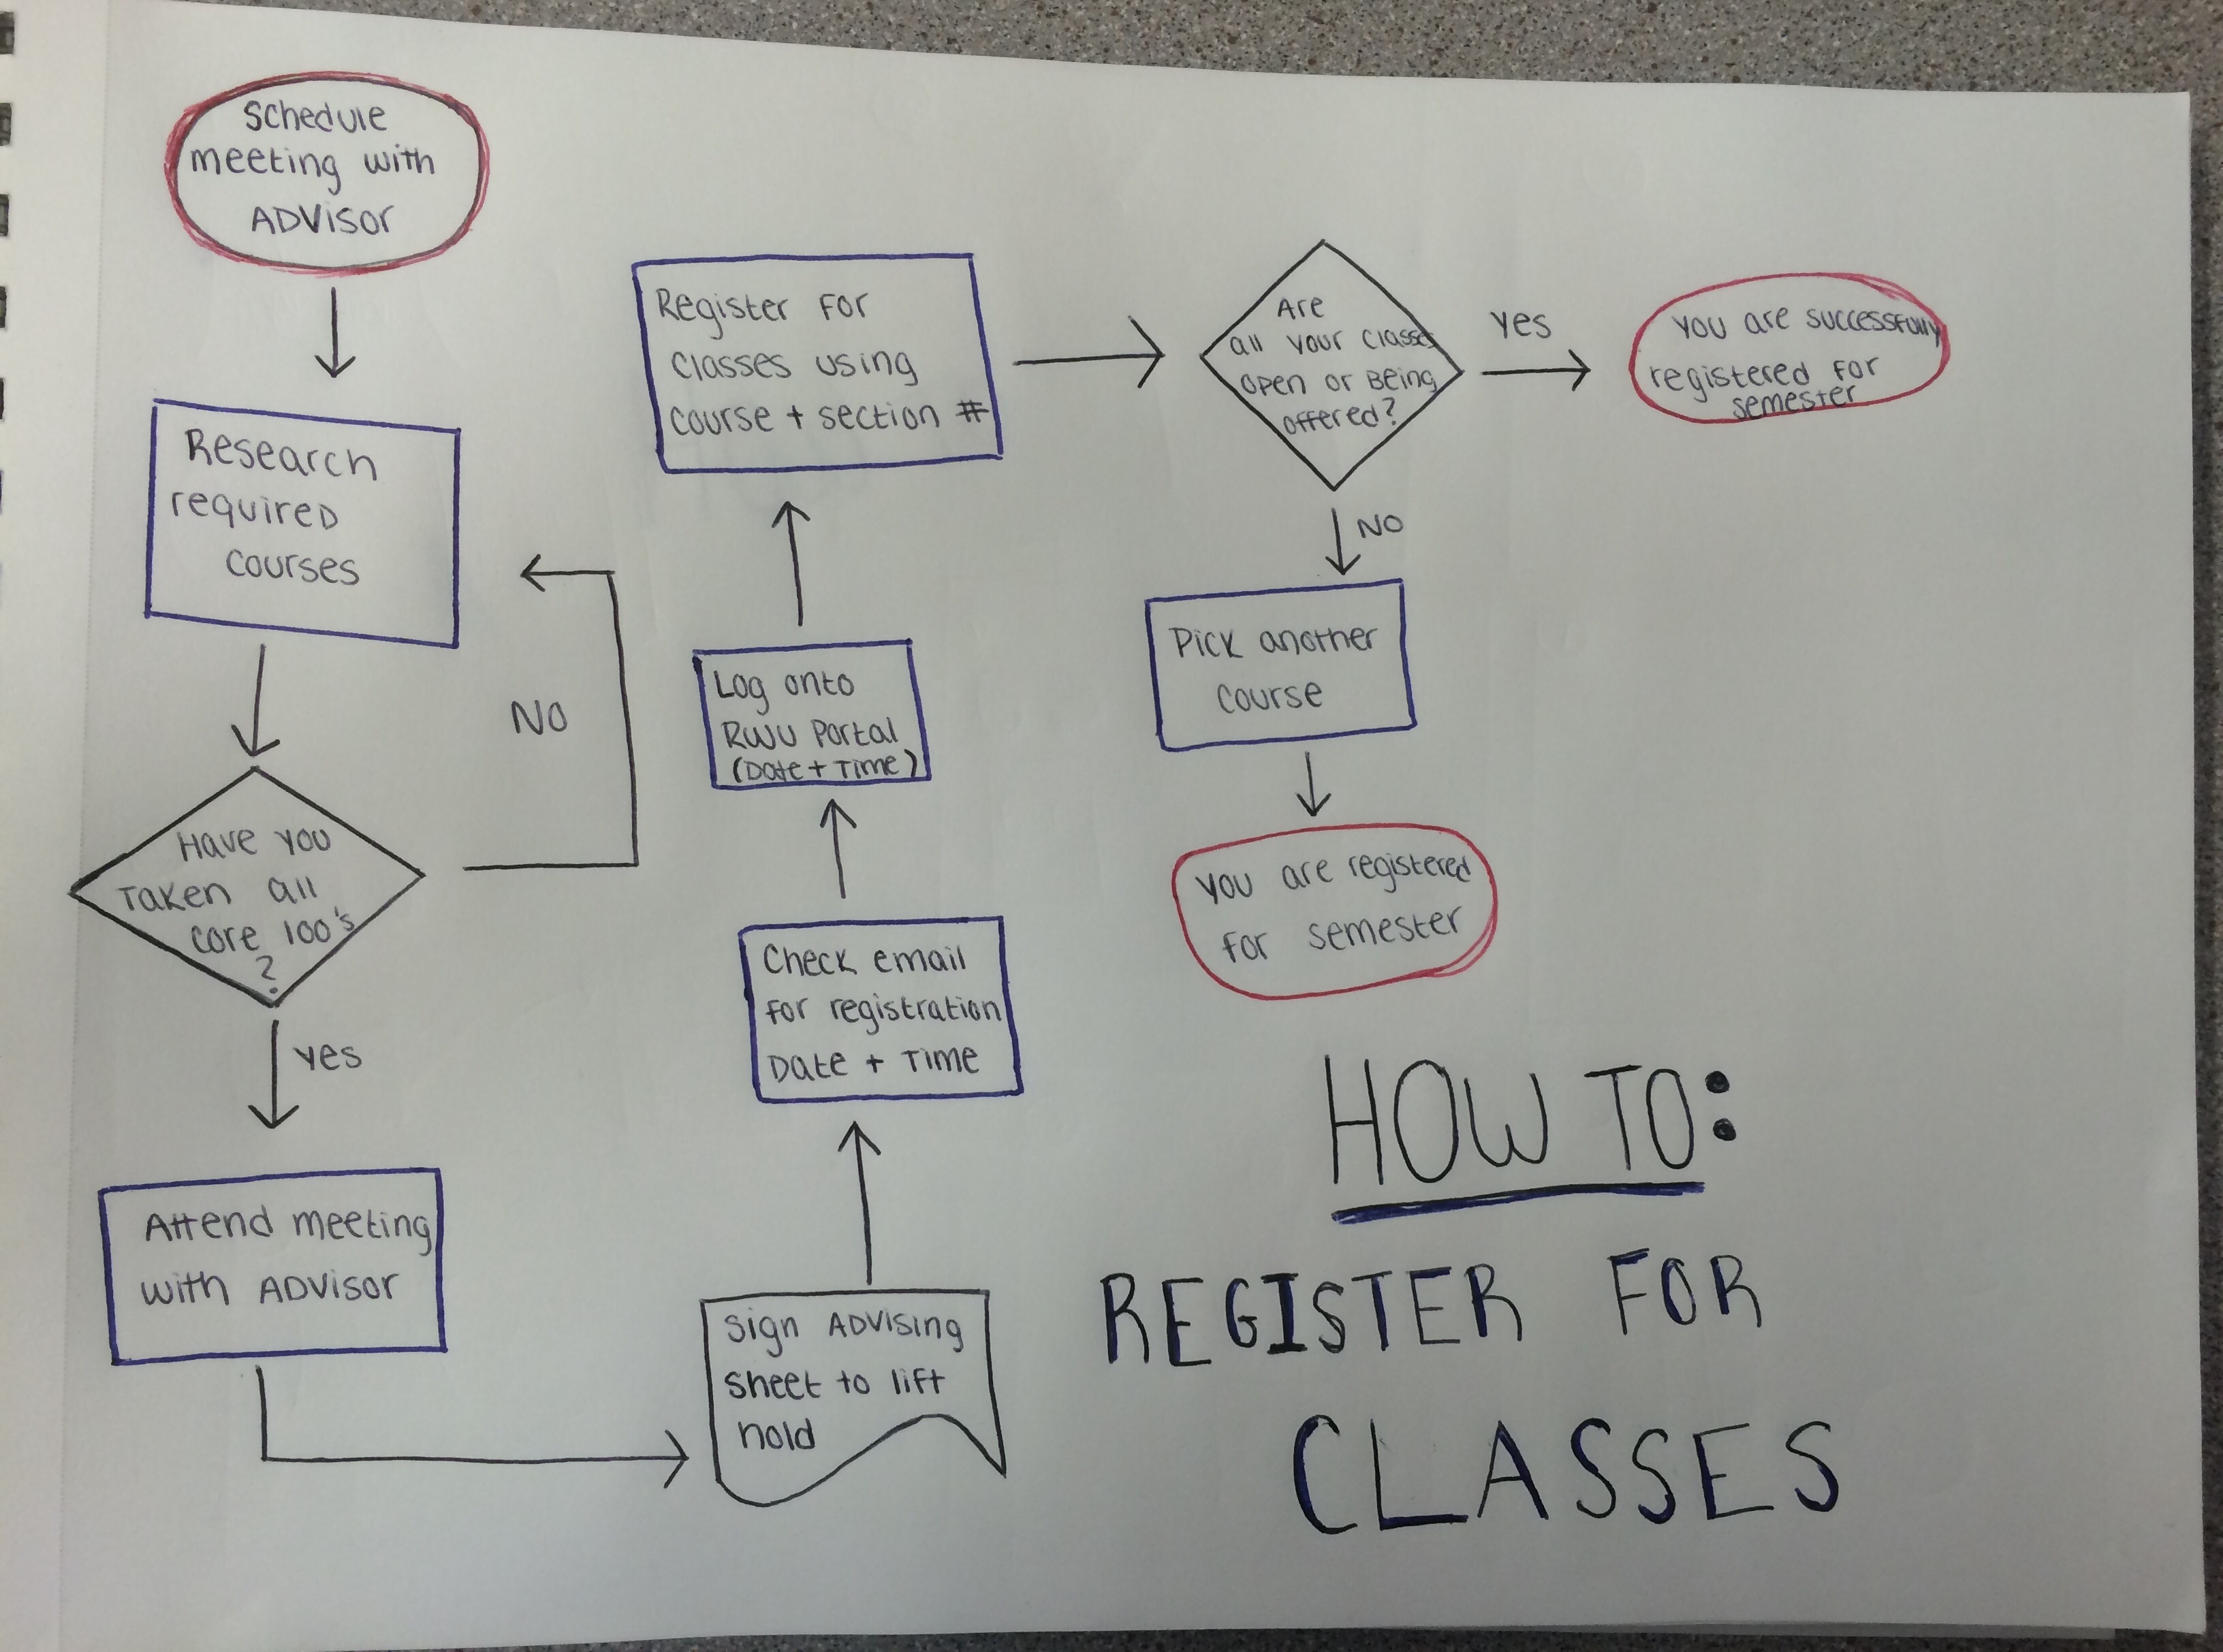 Registration Flow Chart Example